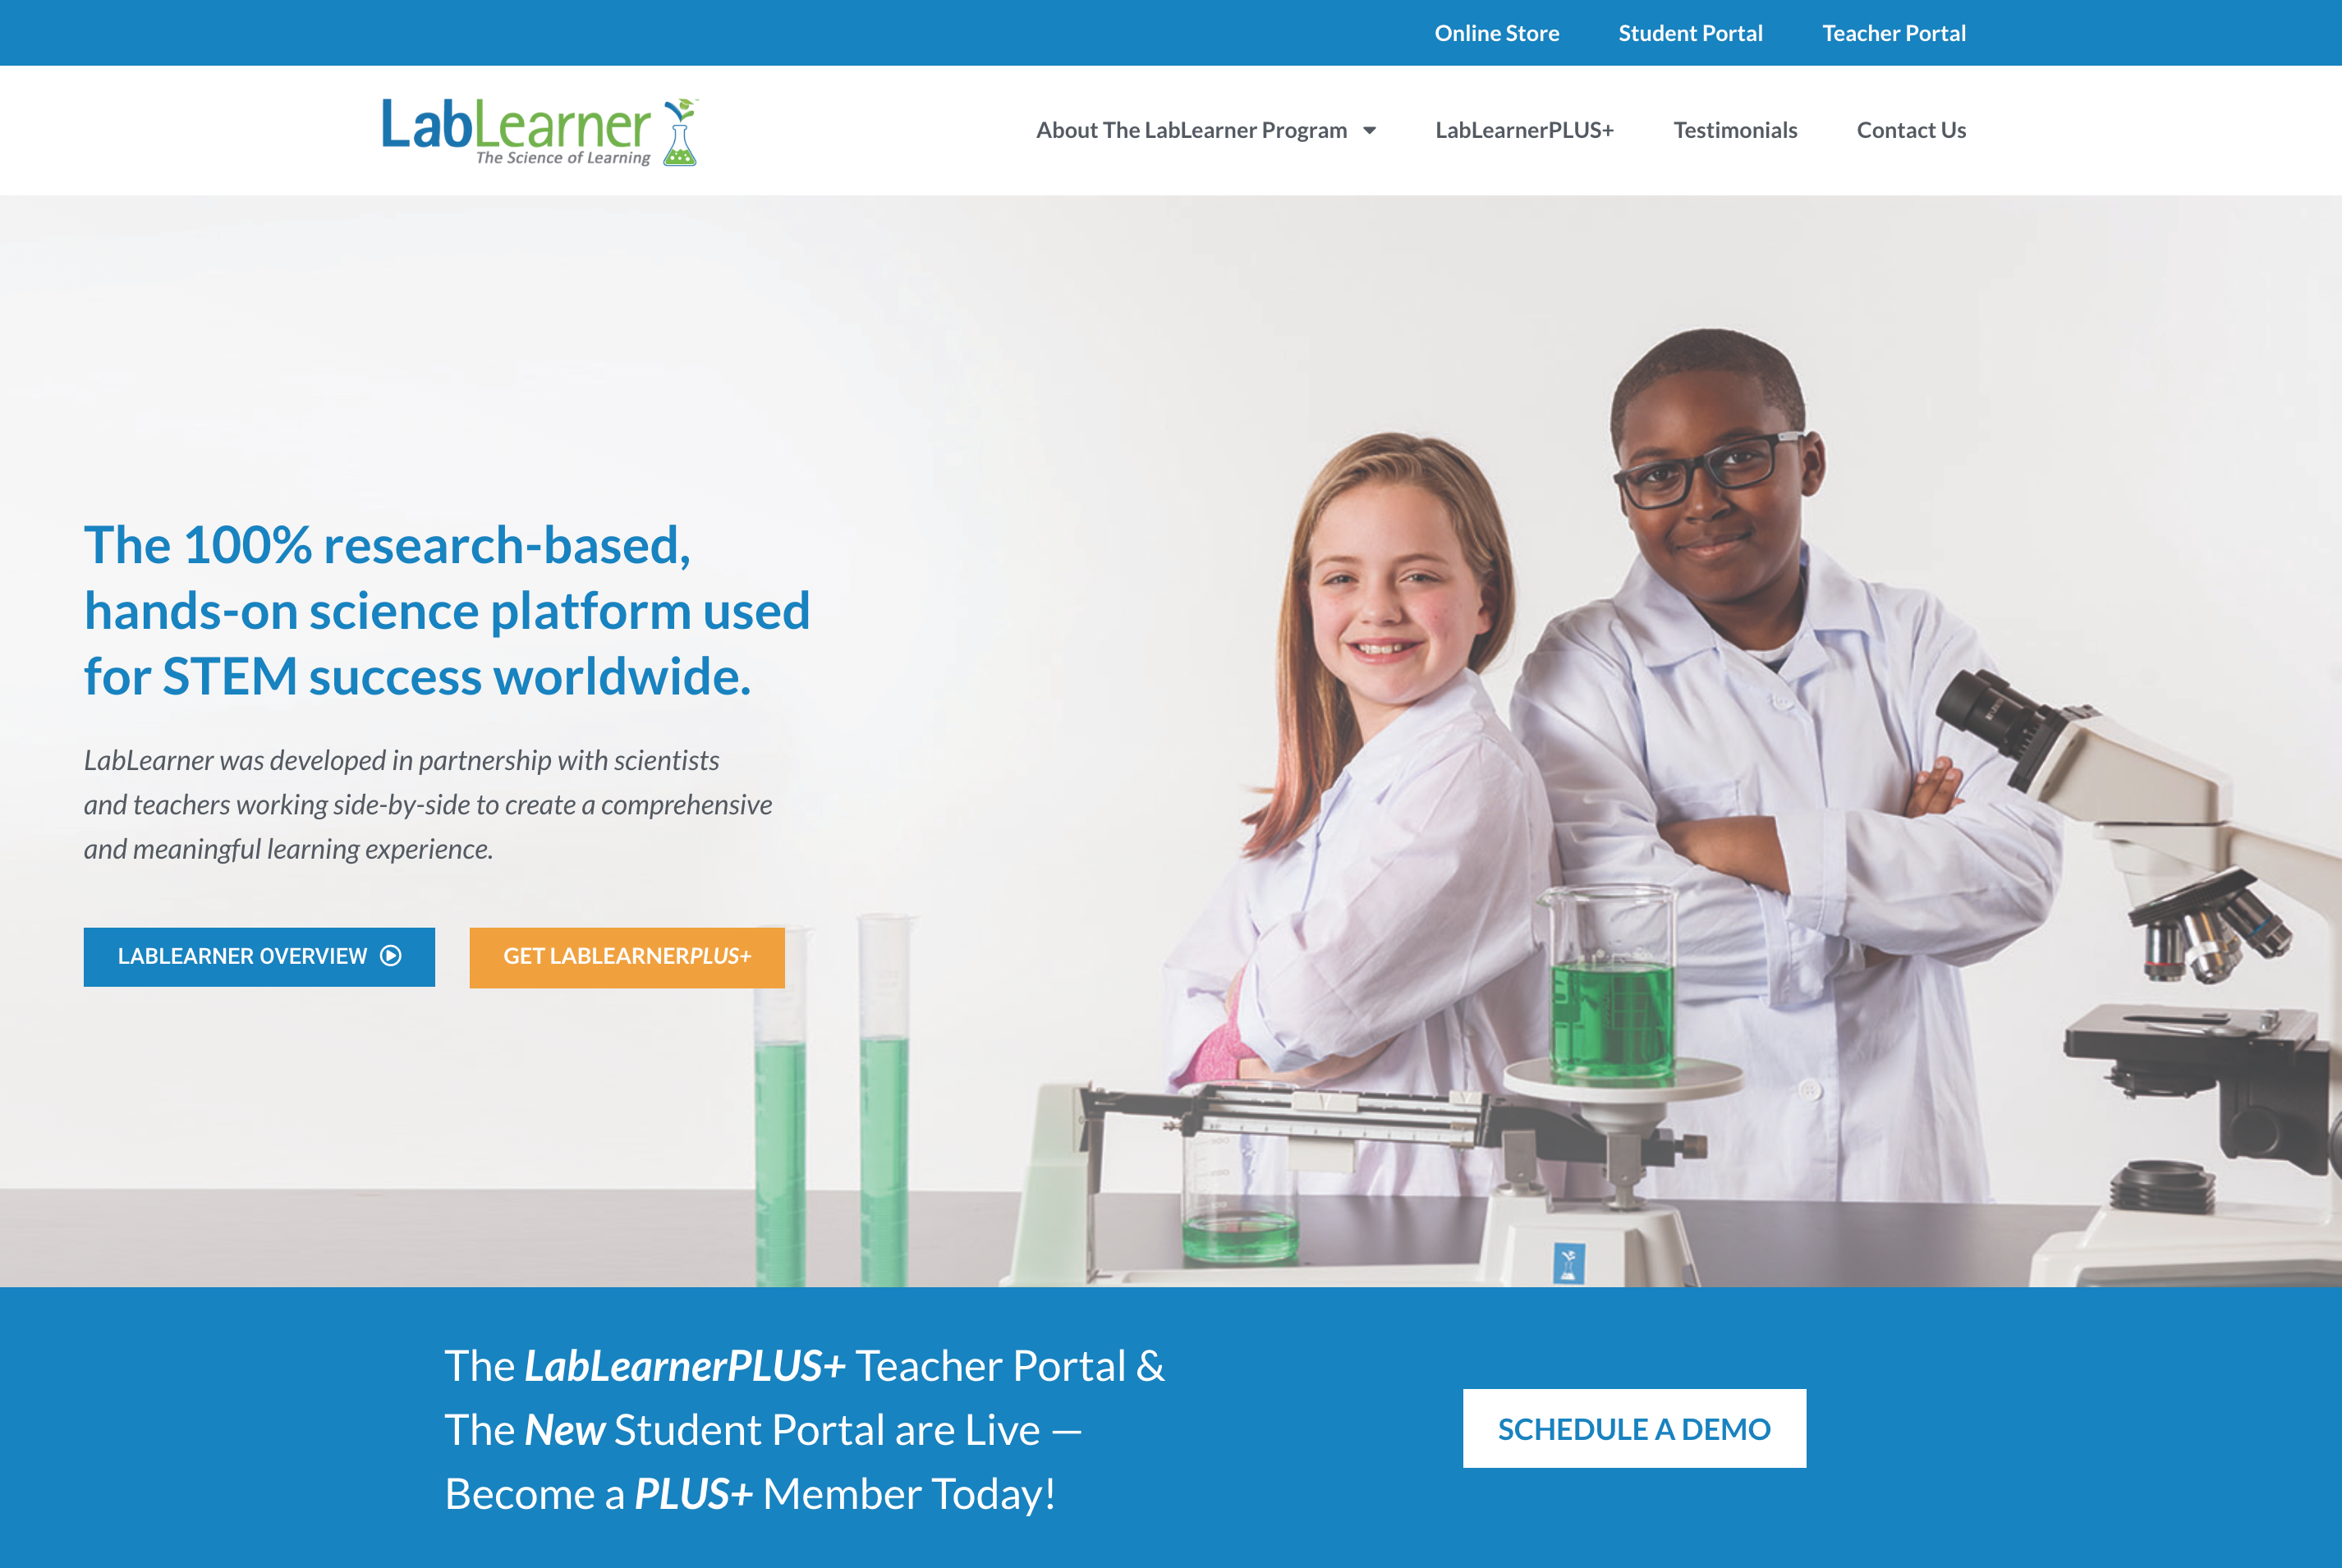 LabLearner - Online enrollment, portals, shopify, and product purchasing